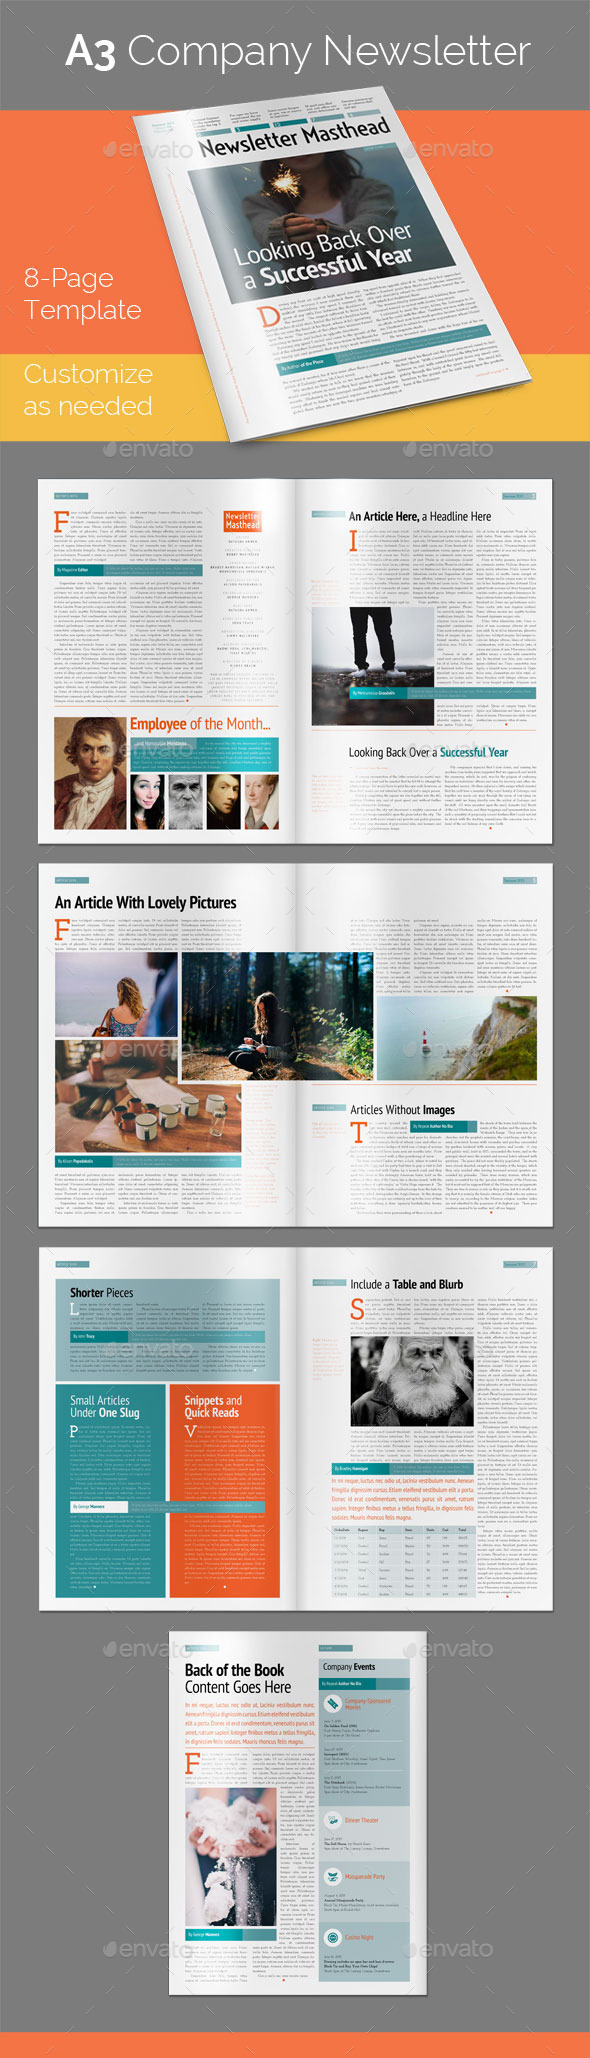 8-Page A3 Company Newsletter in Newsletter Templates